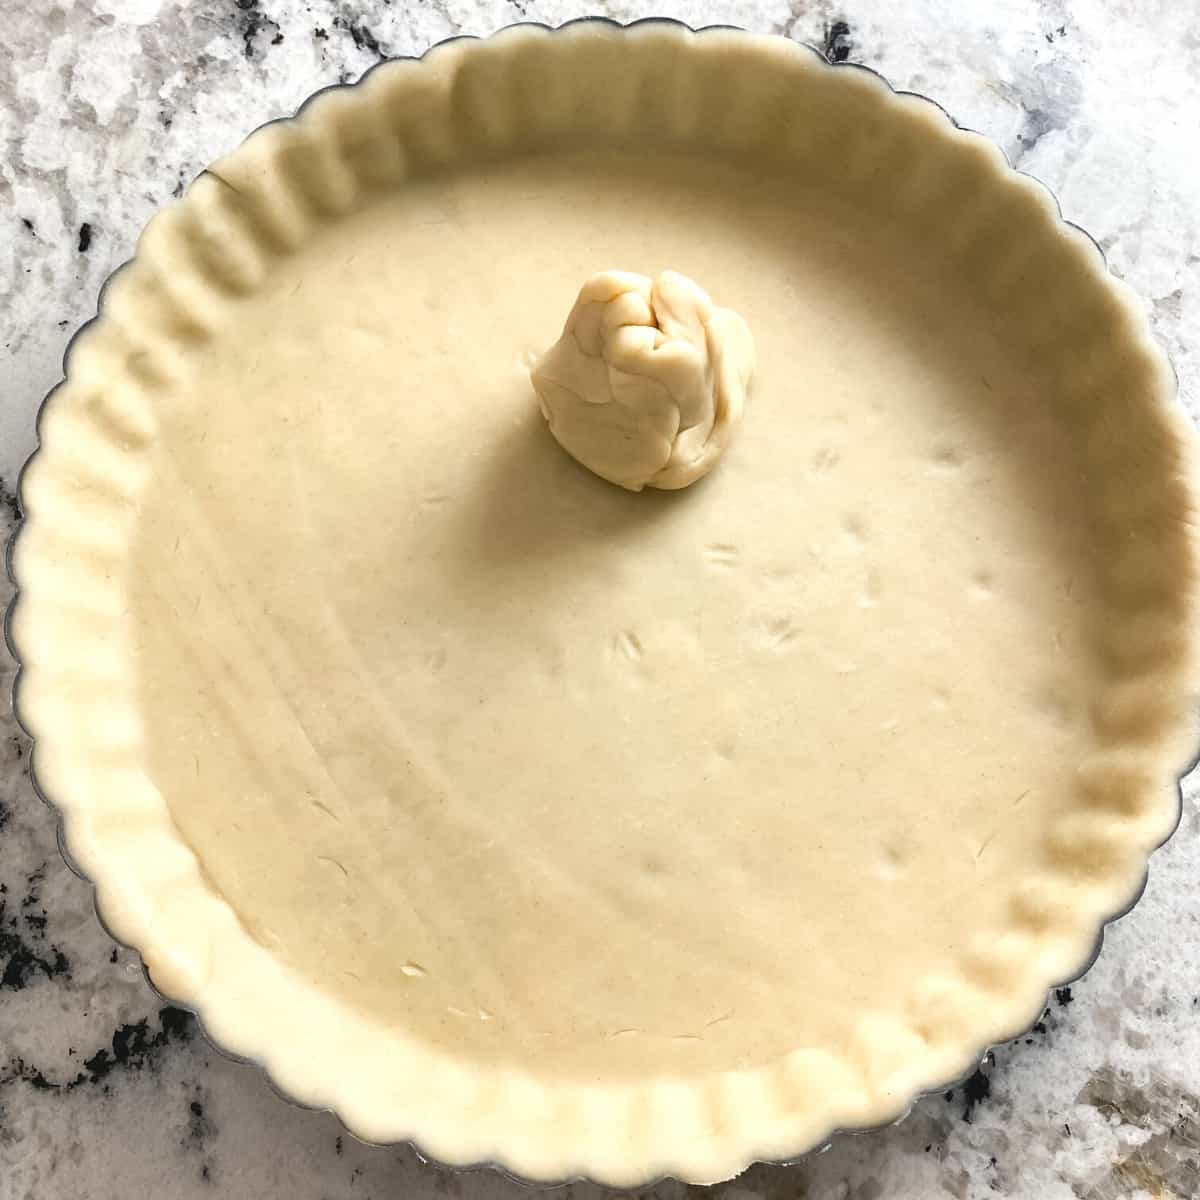 Pie crust is eased and pressed into a tart pan.